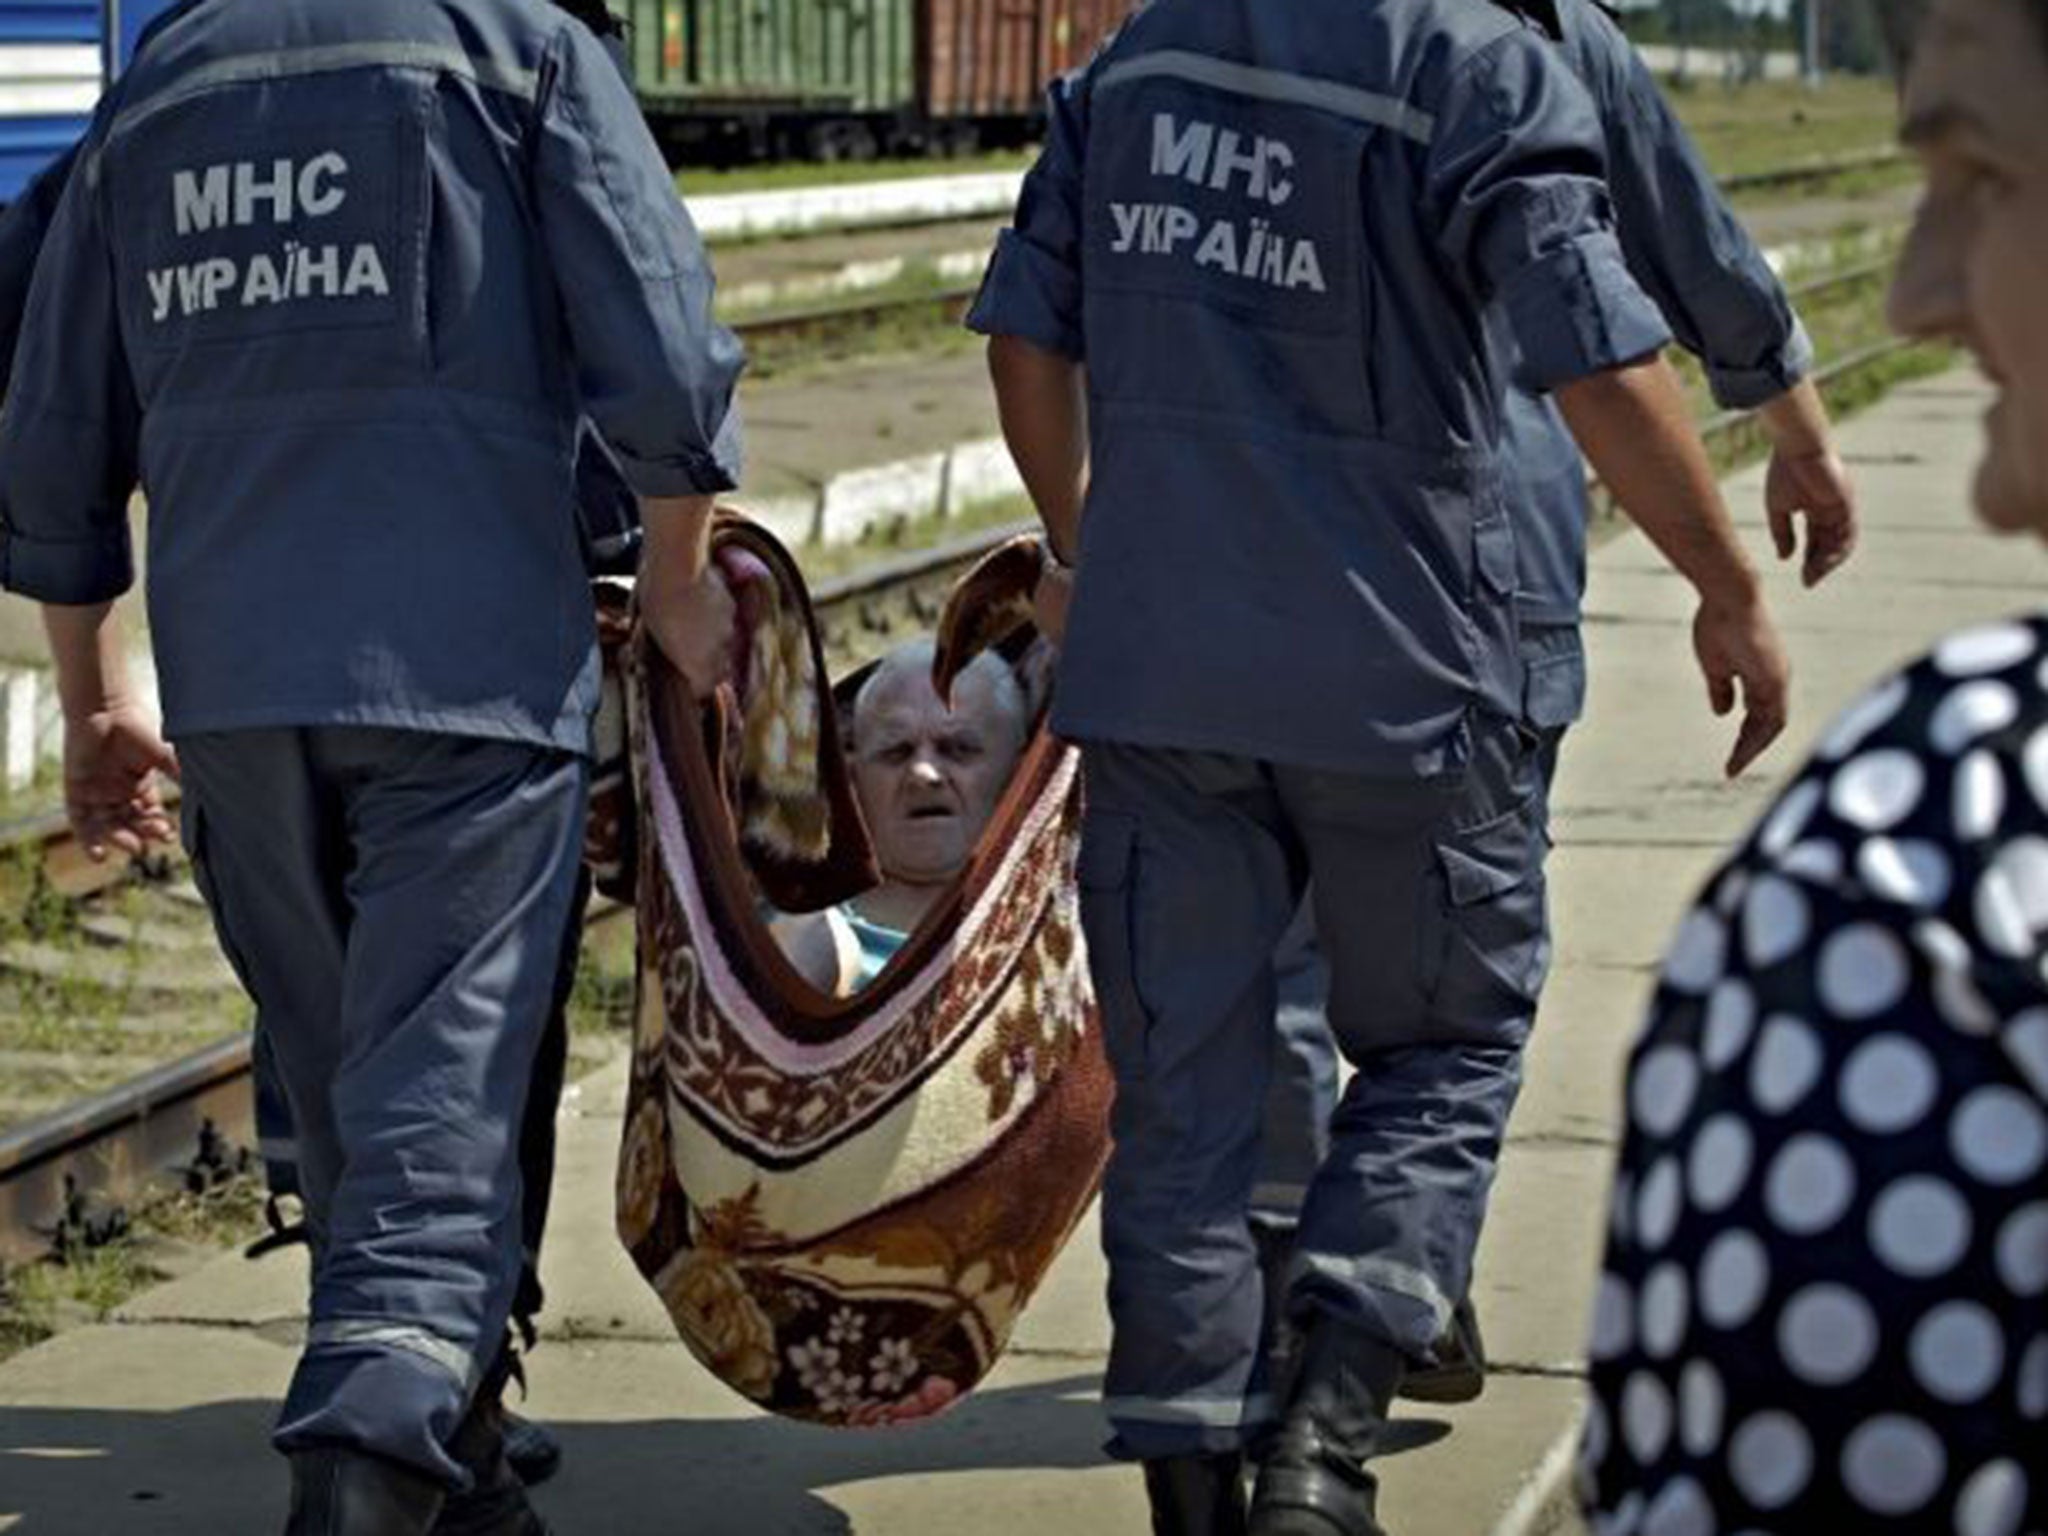 Ukrainian rescuers helping refugees from eastern Ukraine in Svatovo village, Luhansk area, Ukraine, 12 August 2014, as they arrive to a temporary refugee camp.